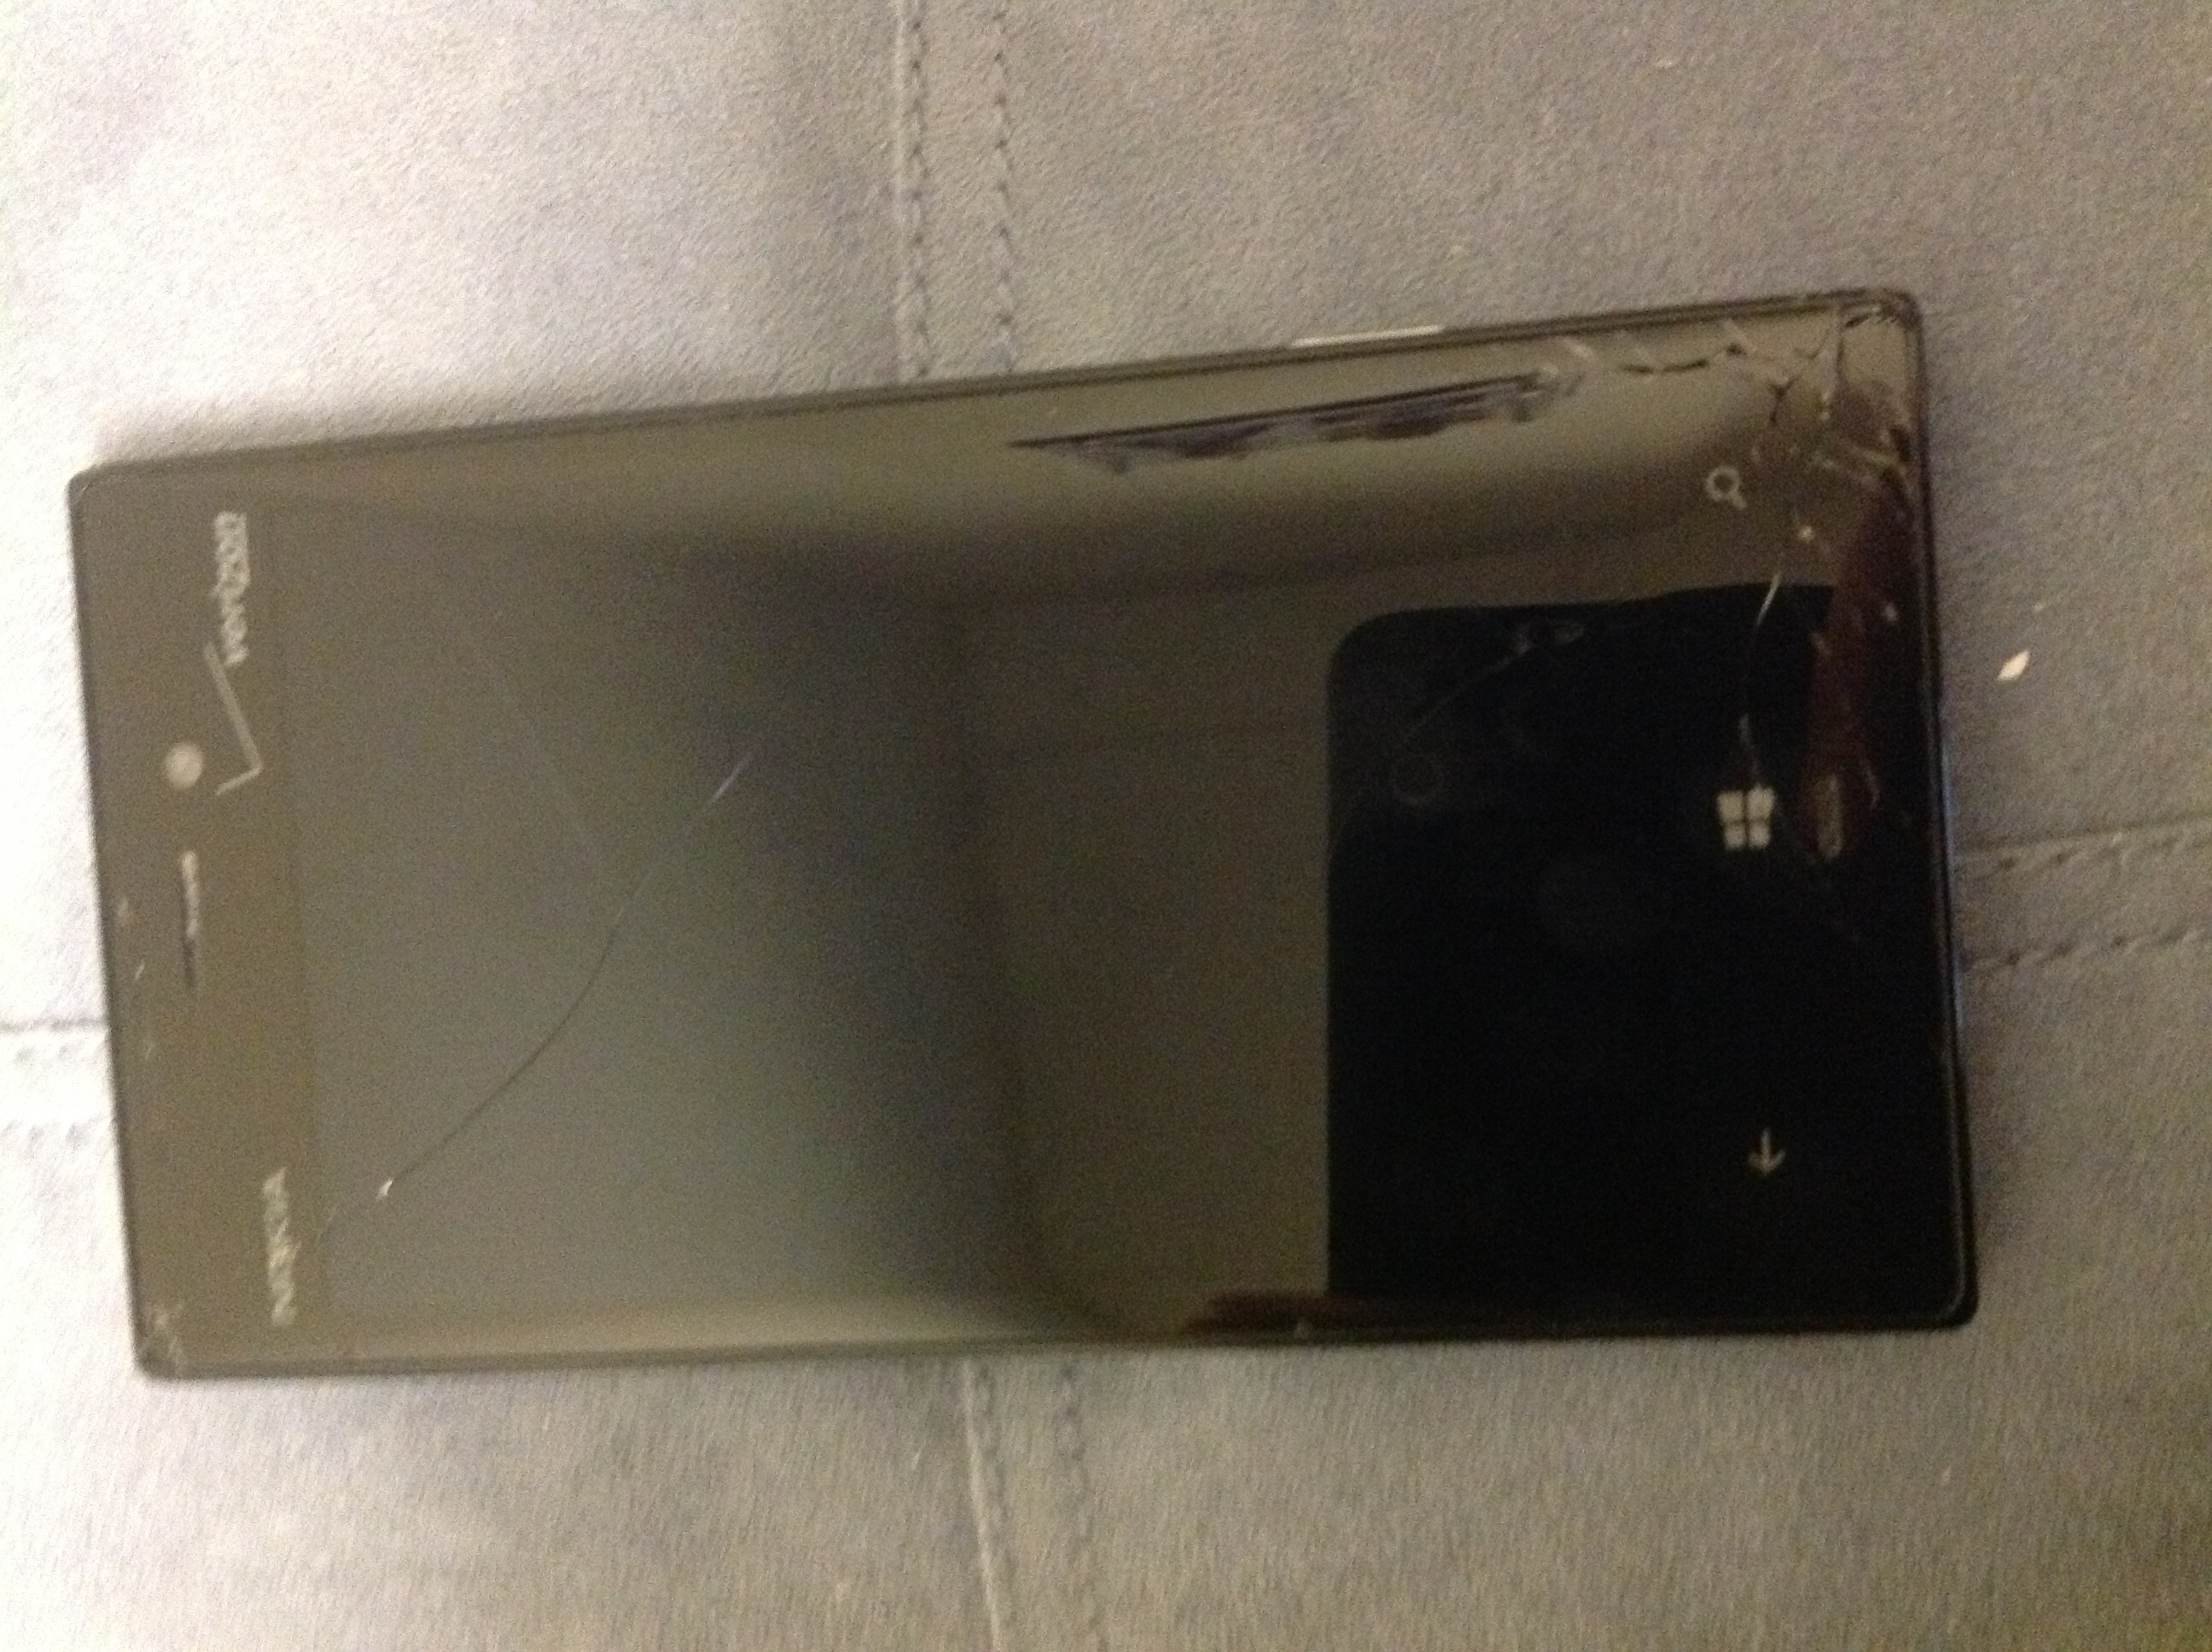 The Rise and Fall of My Lumia 928